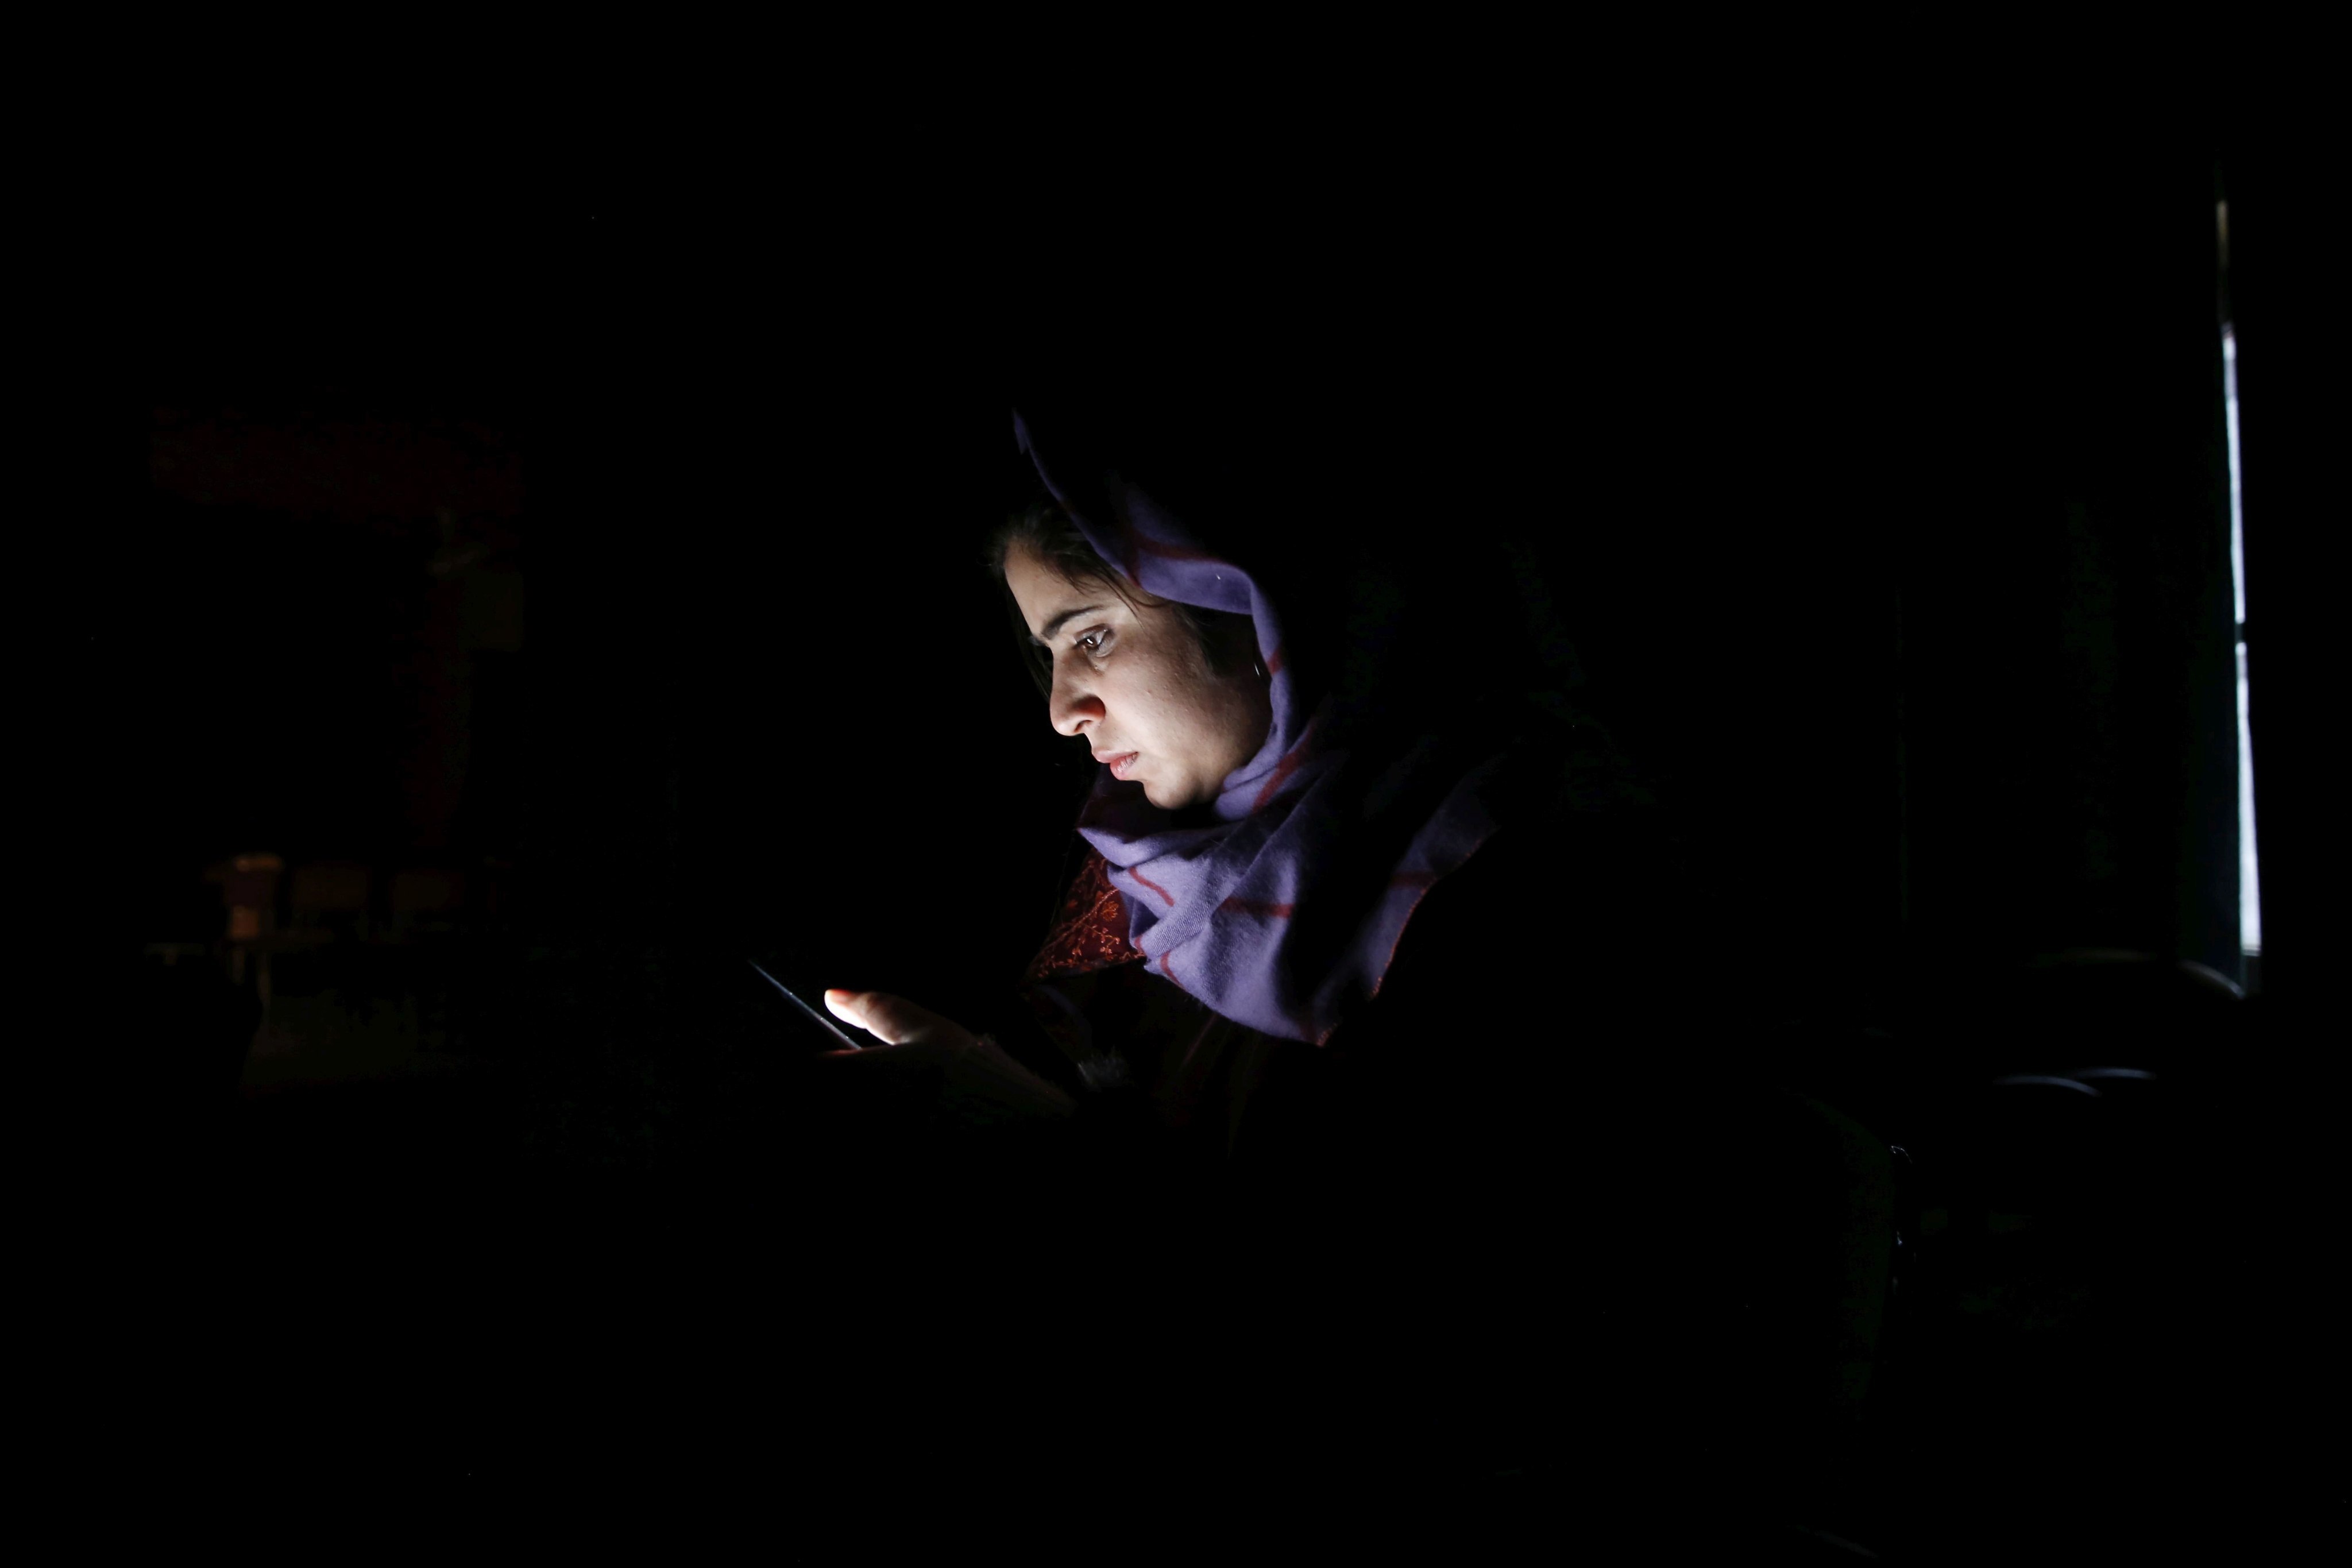 Quratulain Rehbar, a 27 year old Kashmiri photojournalist, was among the Muslim women whose names and photos were listed on the ‘Bully Bai’ application. The app also purported to offer high-profile figures like Pakistani Nobel laureate Malala Yousafzai and Indian actress Shabana Azmi “for sale”. Photo: EPA-EFE